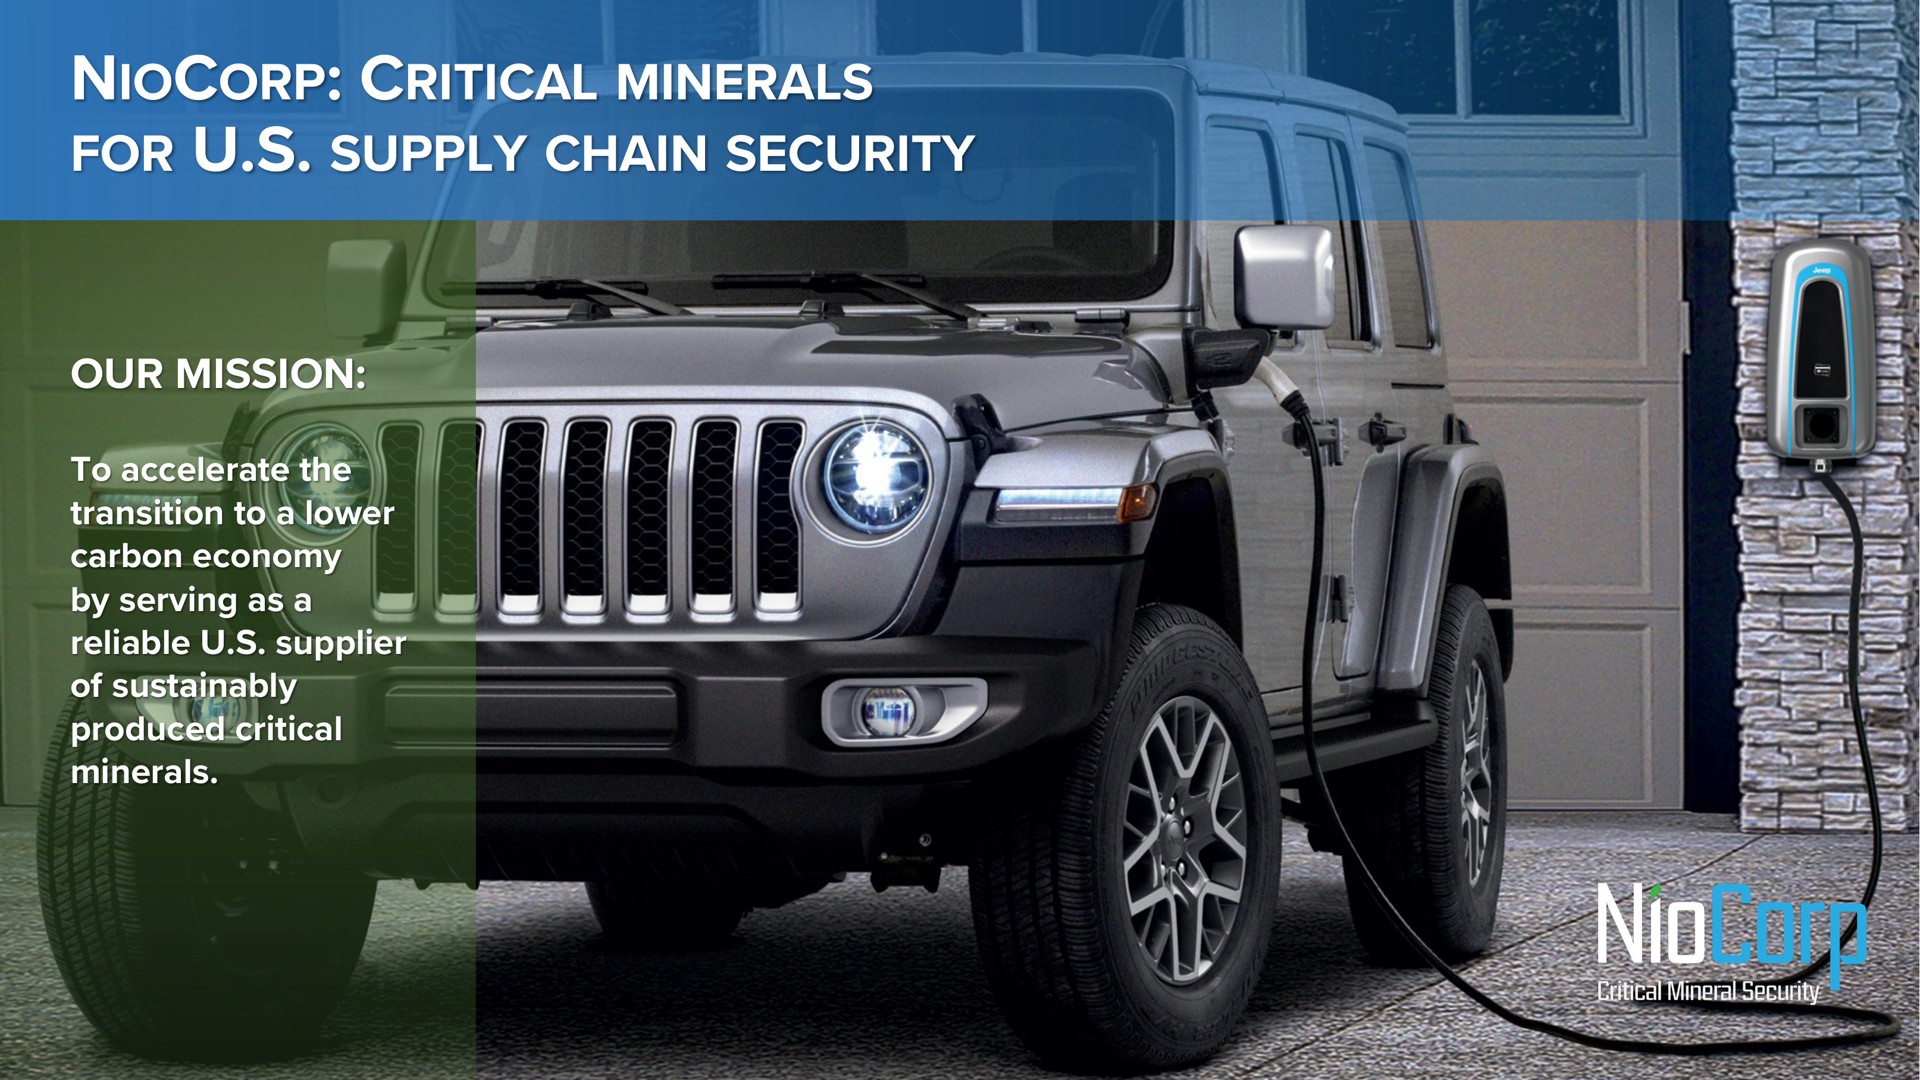 critical minerals for supply chain security our mission to accelerate the transition to a lower carbon economy by serving as a reliable supplier of produced critical minerals erg | NioCorp